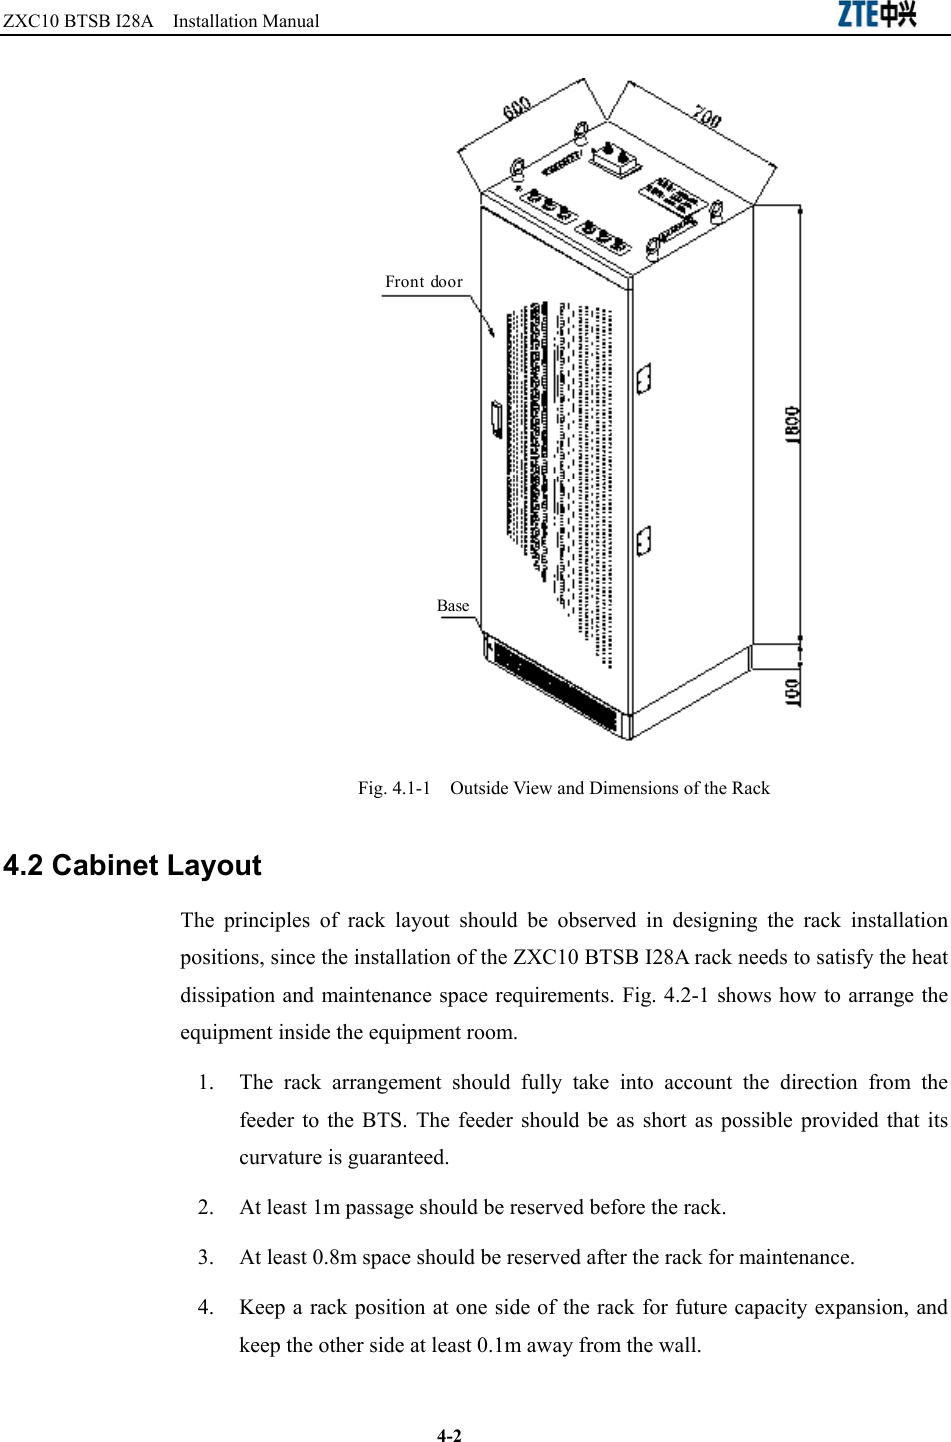 ZXC10 BTSB I28A  Installation Manual                                                          4-2 Front doorBase Fig. 4.1-1    Outside View and Dimensions of the Rack 4.2 Cabinet Layout The principles of rack layout should be observed in designing the rack installation positions, since the installation of the ZXC10 BTSB I28A rack needs to satisfy the heat dissipation and maintenance space requirements. Fig. 4.2-1 shows how to arrange the equipment inside the equipment room.   1.  The rack arrangement should fully take into account the direction from the feeder to the BTS. The feeder should be as short as possible provided that its curvature is guaranteed. 2.  At least 1m passage should be reserved before the rack. 3.  At least 0.8m space should be reserved after the rack for maintenance. 4.  Keep a rack position at one side of the rack for future capacity expansion, and keep the other side at least 0.1m away from the wall. 